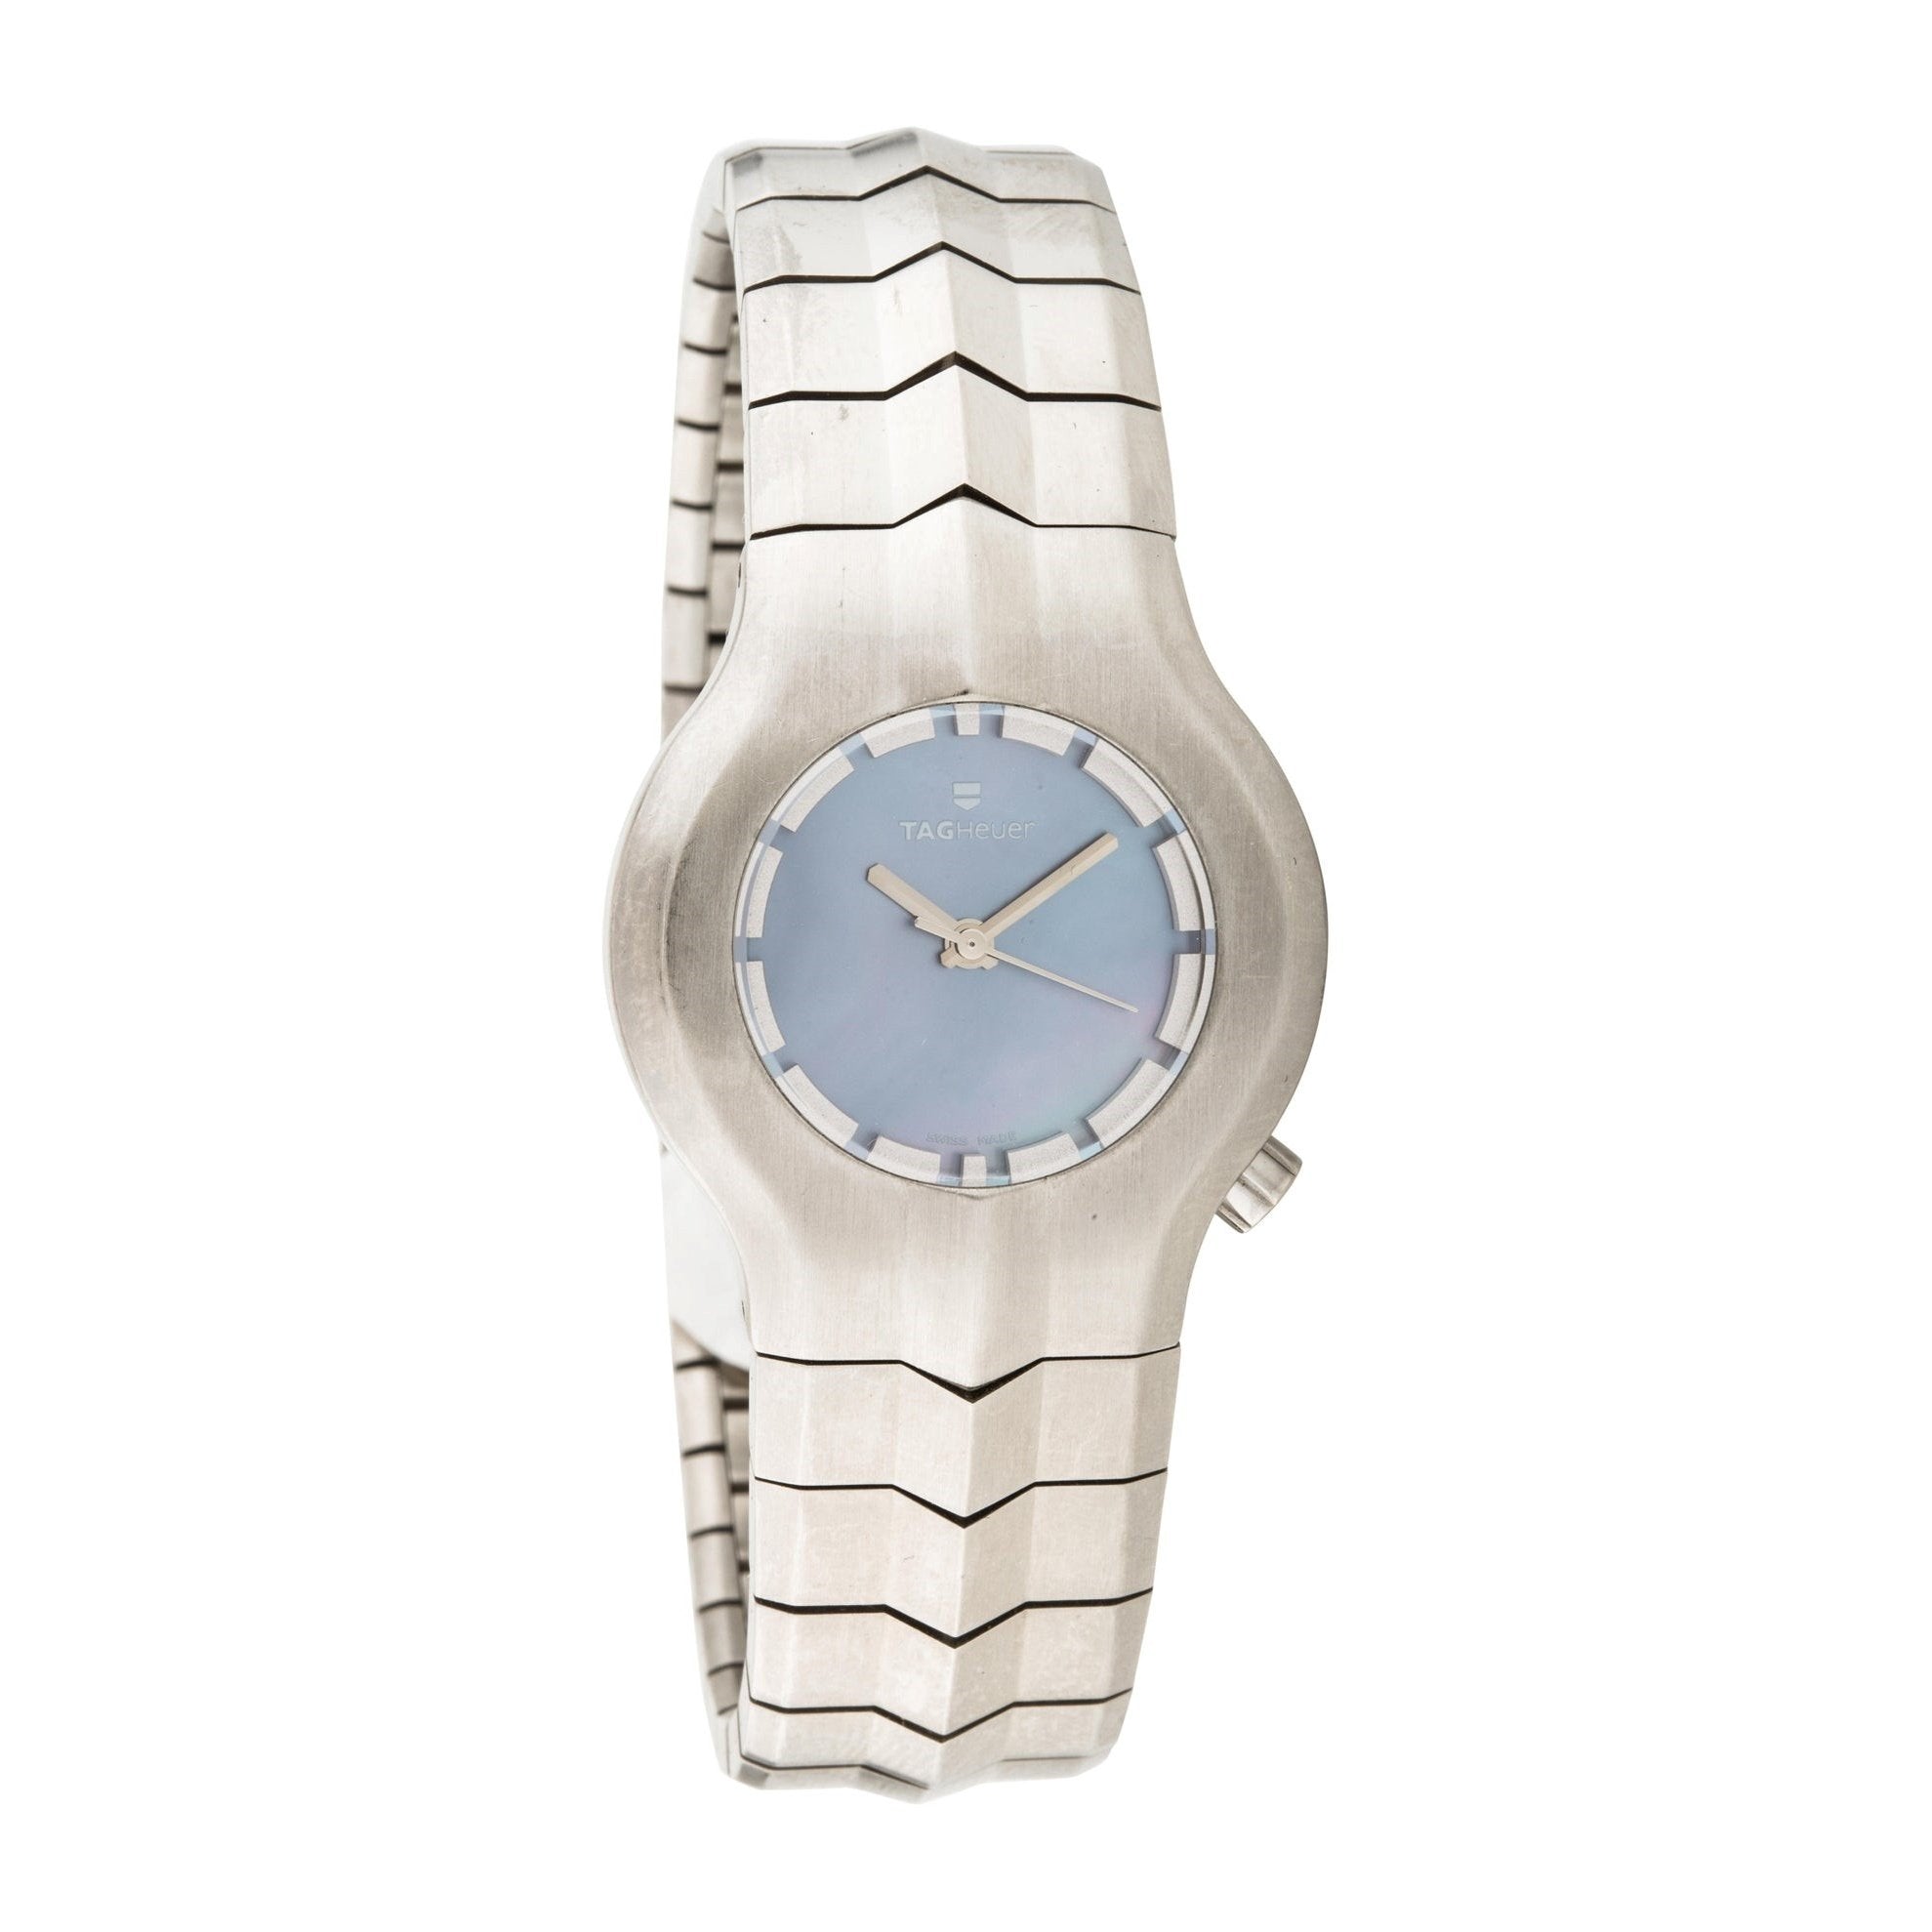 Tag Heuer Women's WP1312.BA0750 Alter Ego Stainless Steel Watch